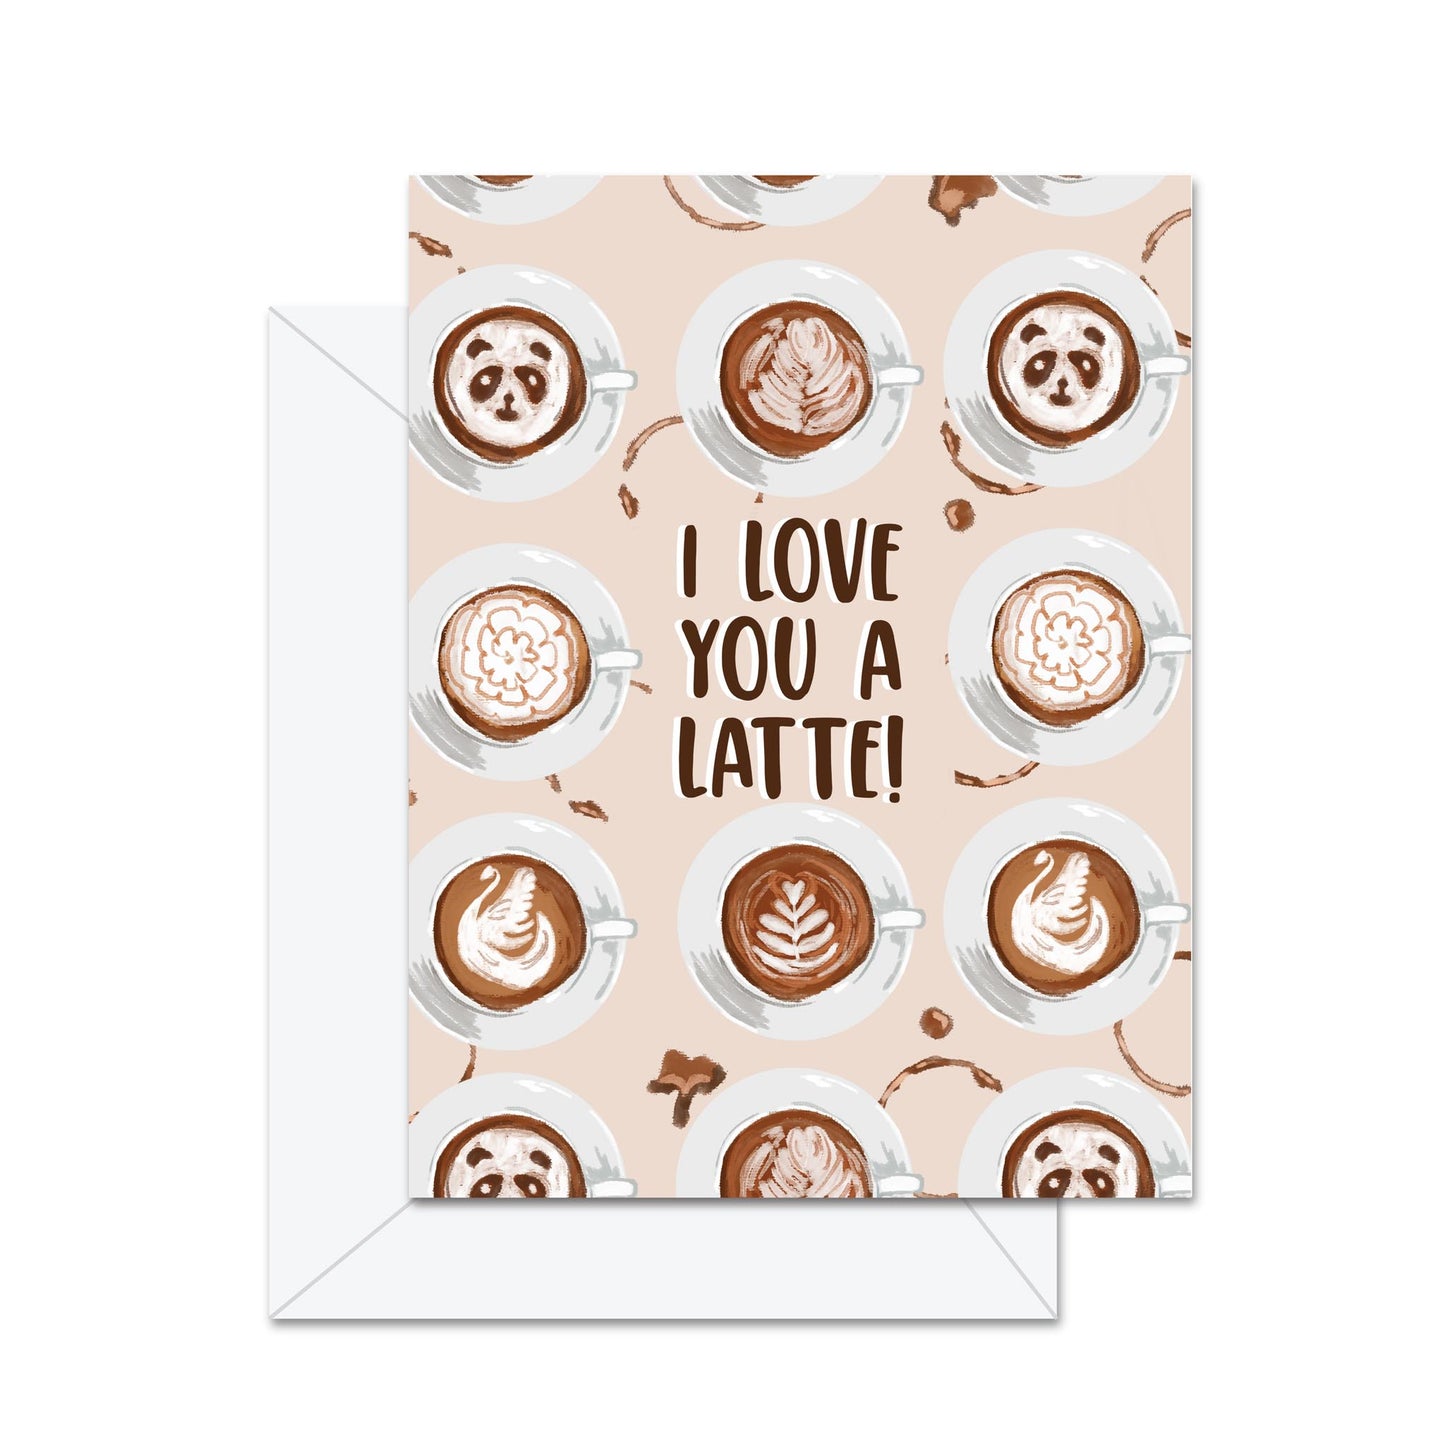 I Love You A Latte! - Greeting Card